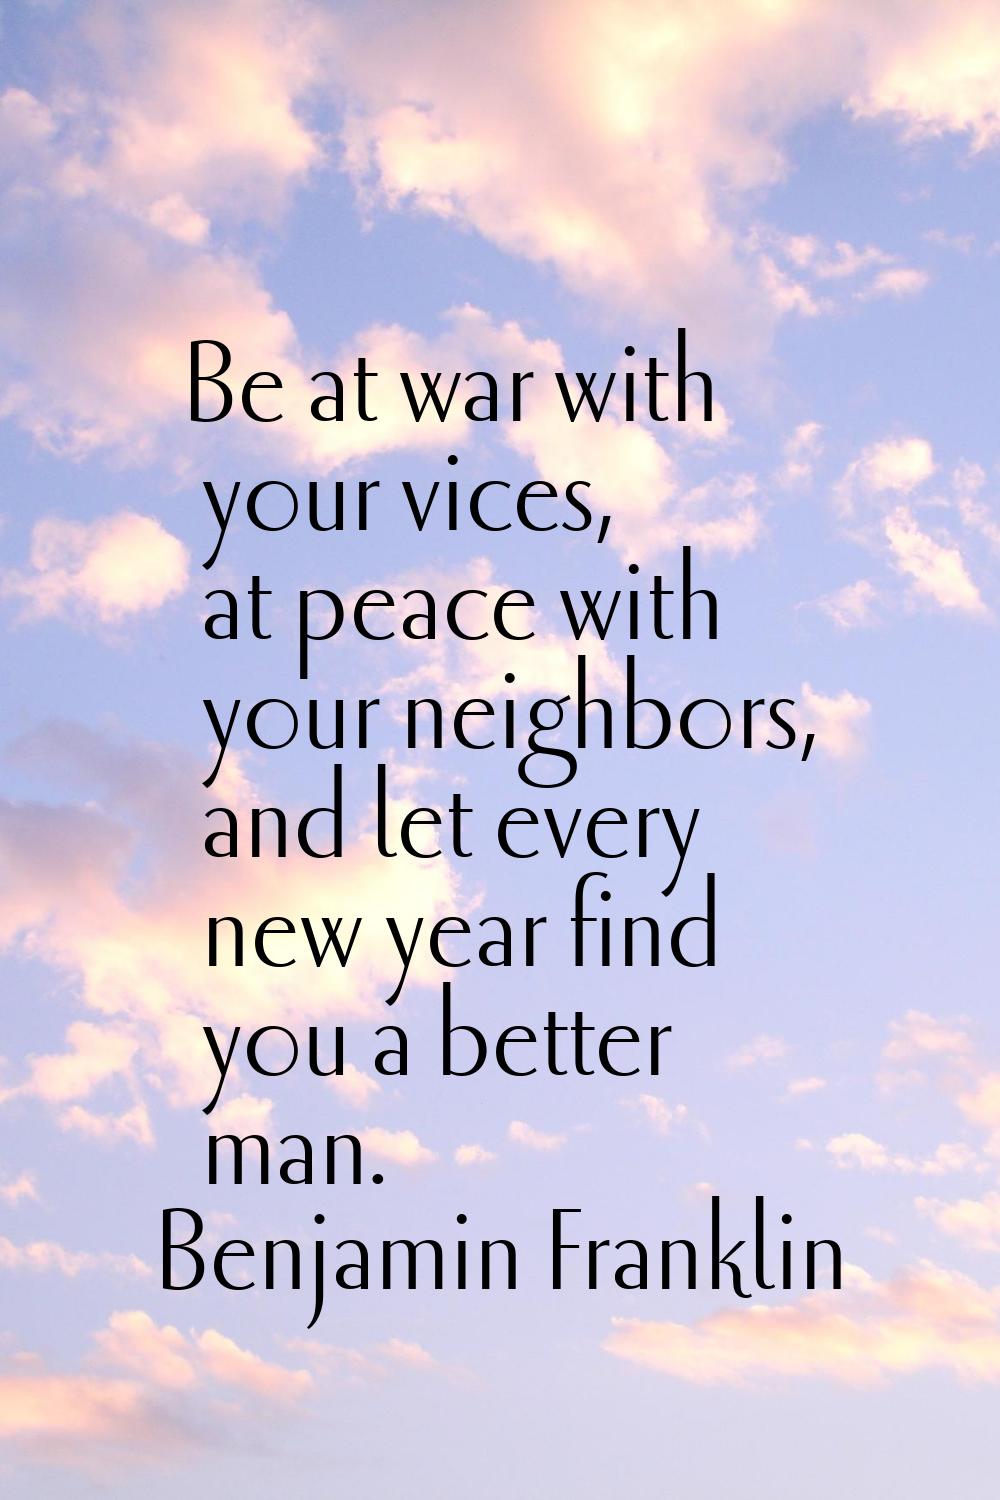 Be at war with your vices, at peace with your neighbors, and let every new year find you a better m